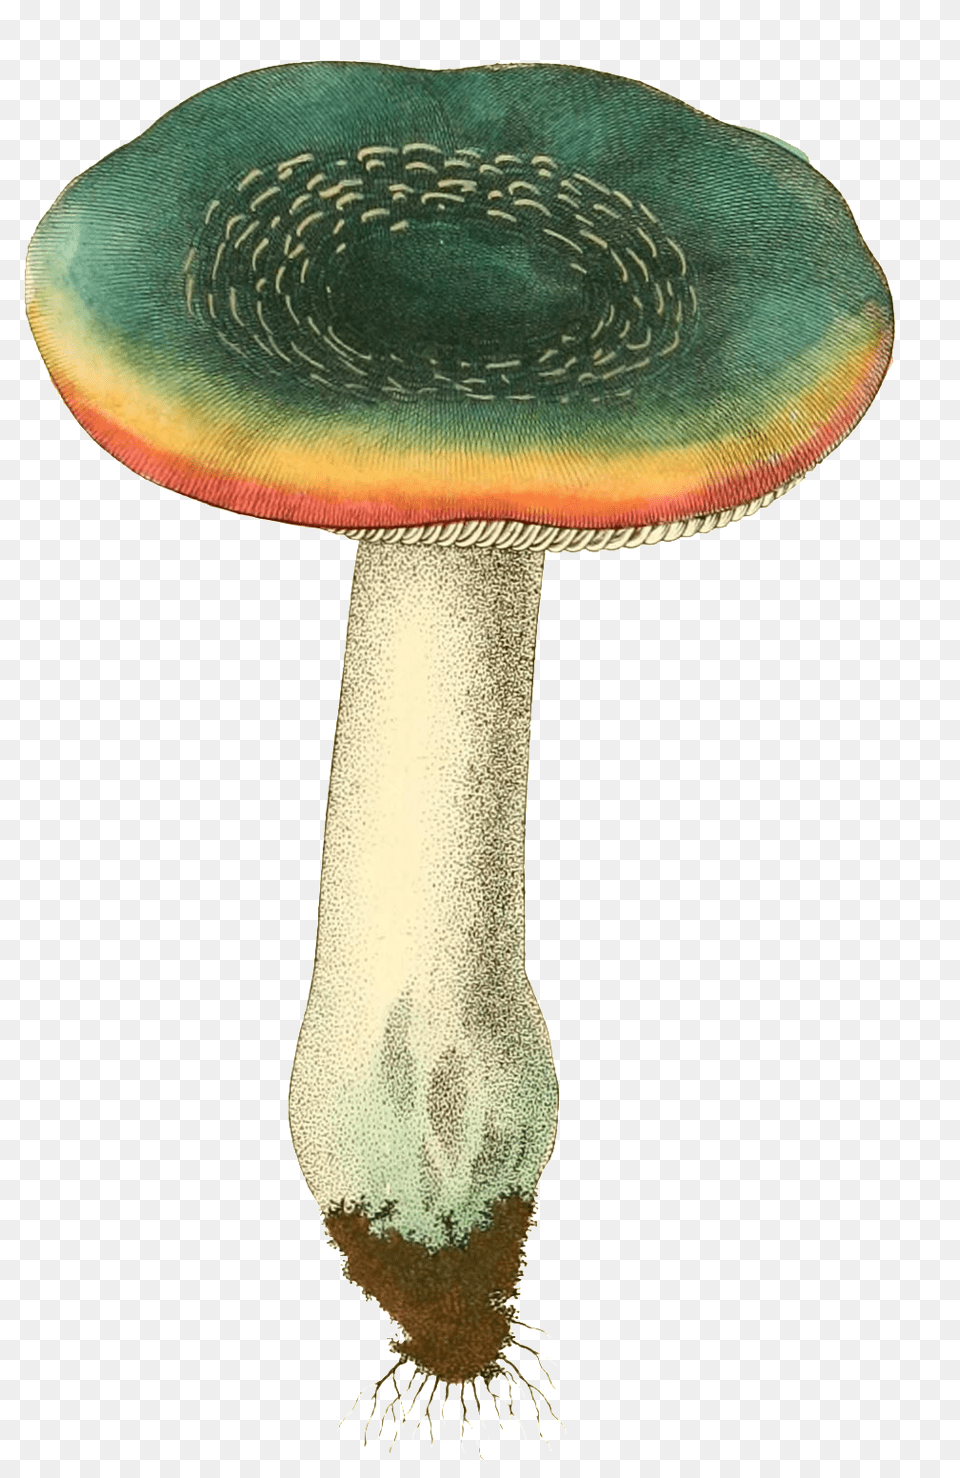 Wild Mushroom Plant Vector About Ink Green, Fungus, Agaric, Amanita Free Png